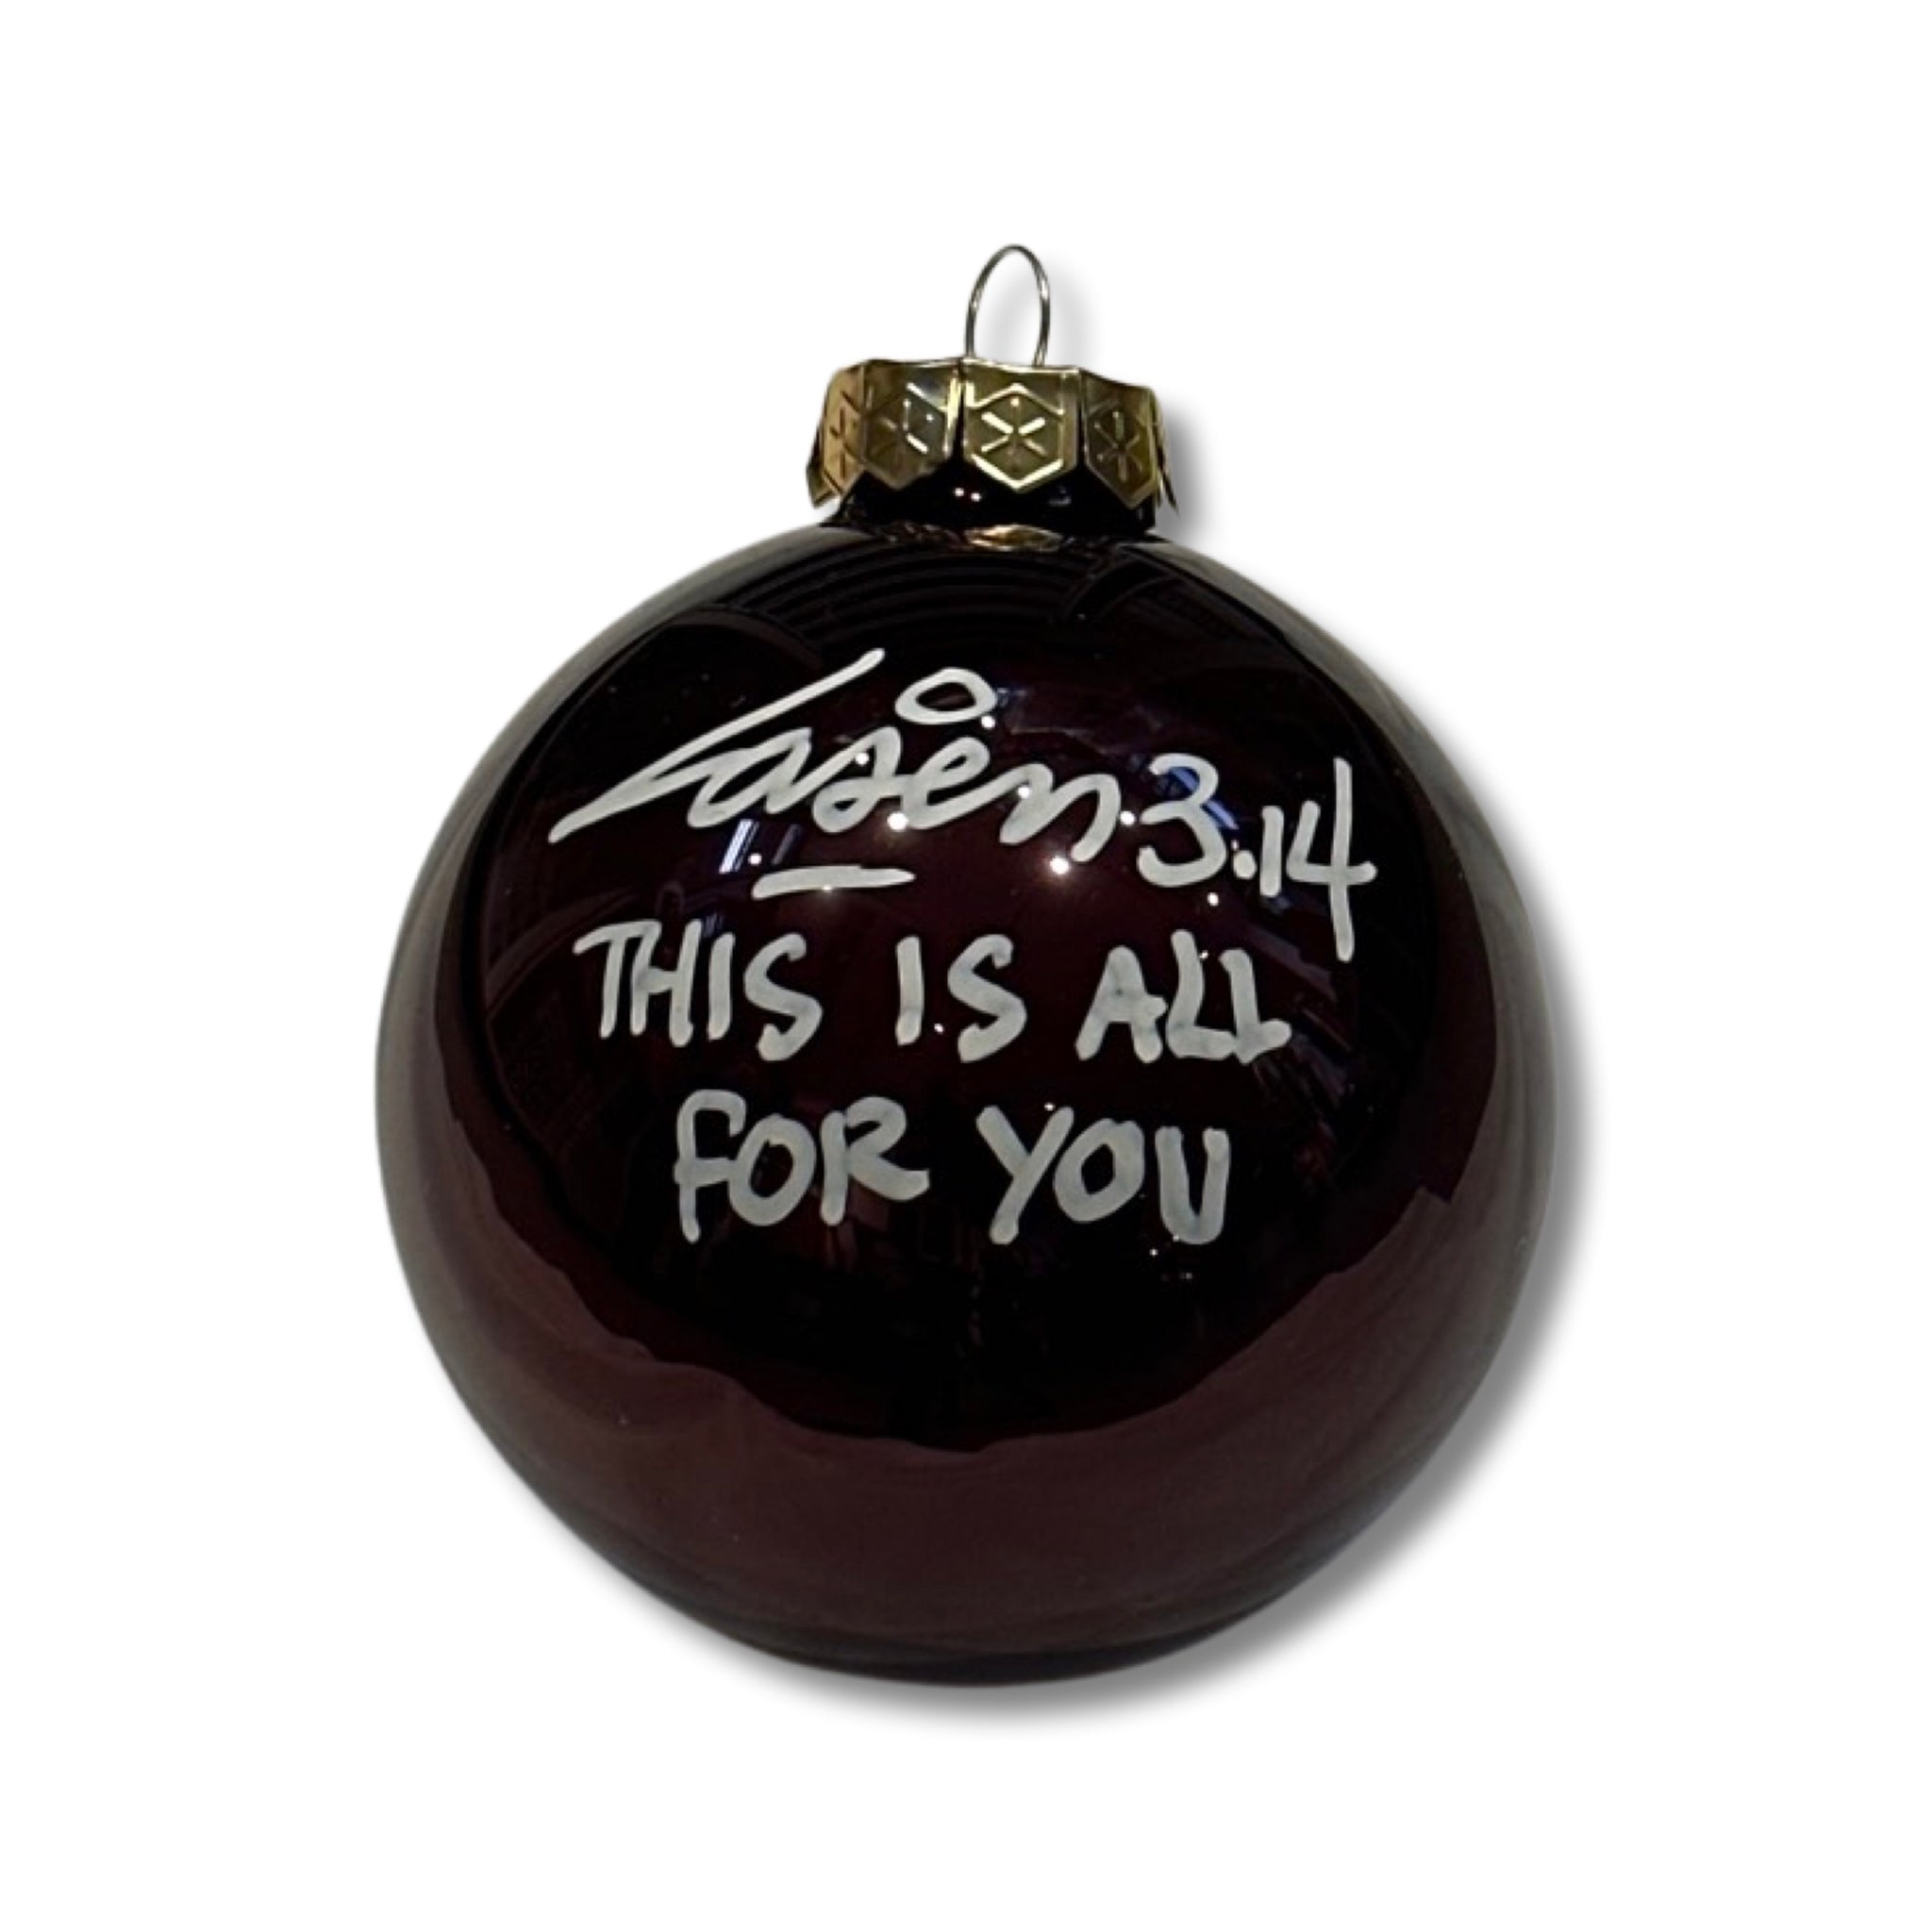 Laser 3.14 - Unique Christmas ball signed